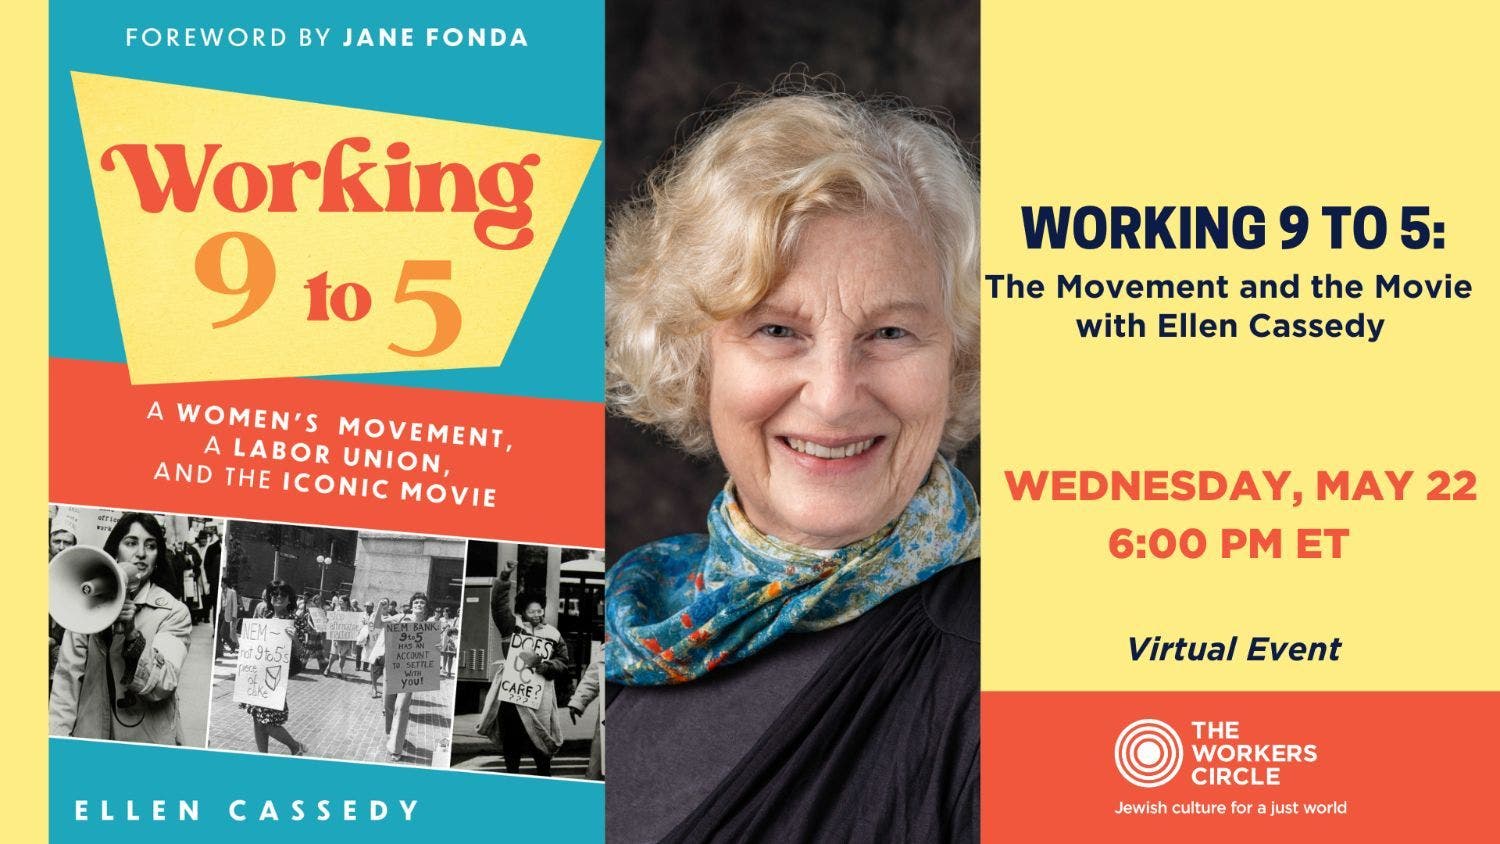 The Workers Circle presents: Working 9 to 5: The Movement and the Movie with Ellen Cassedy